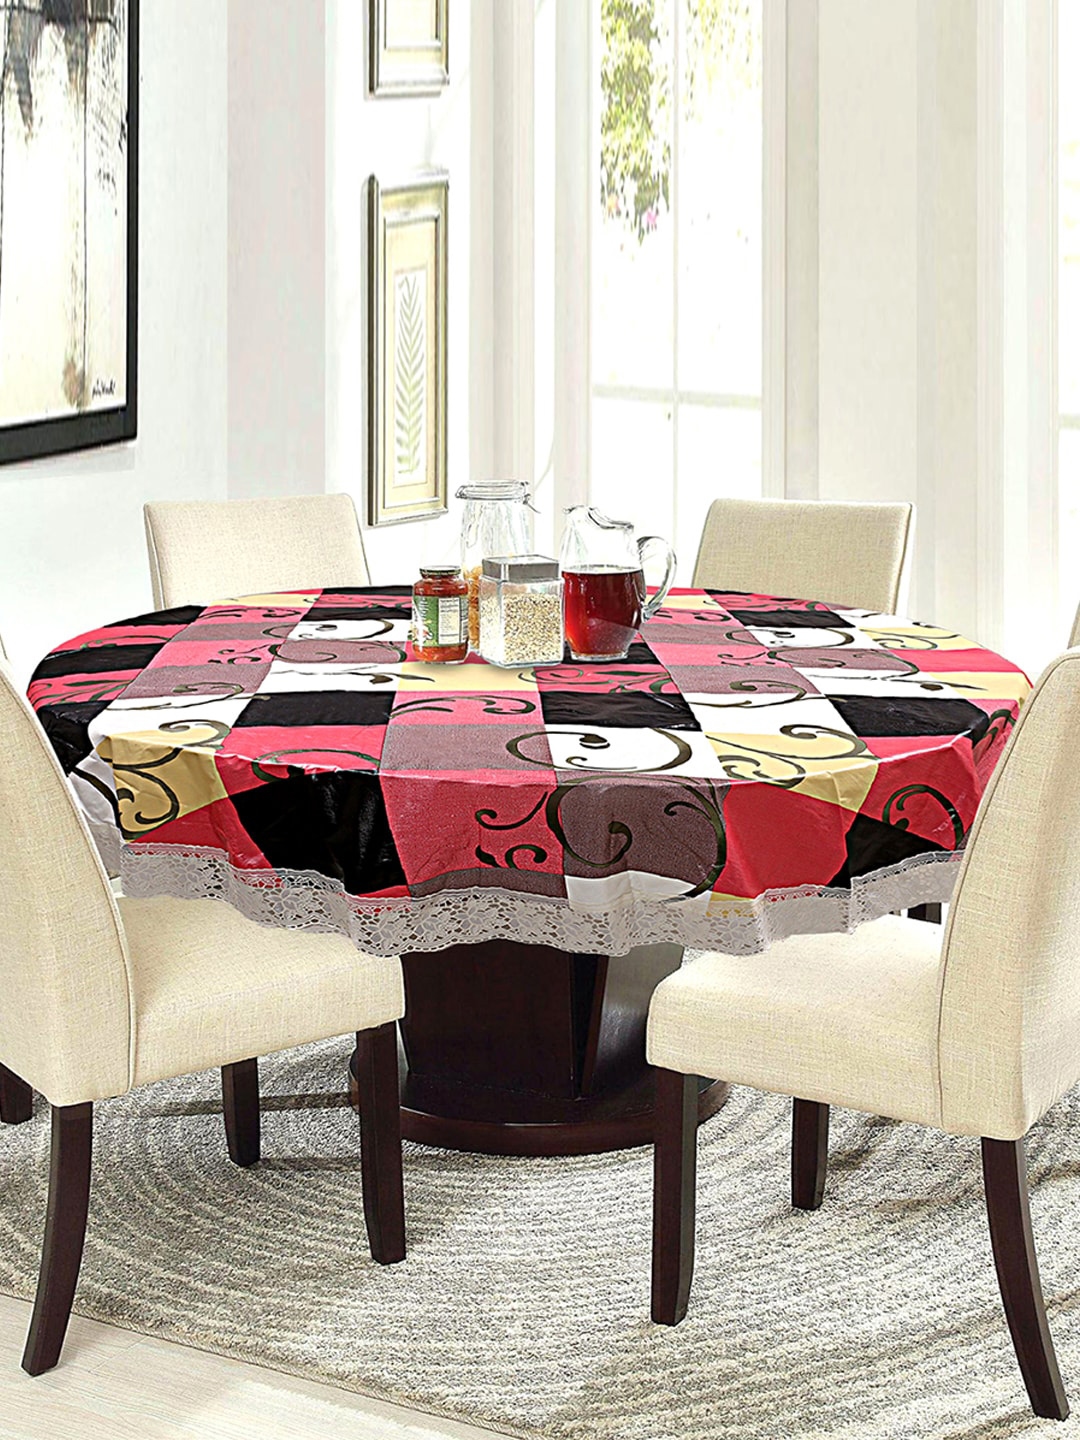 Kuber Industries Multicoloured Printed 6 Seater Round Table Cover